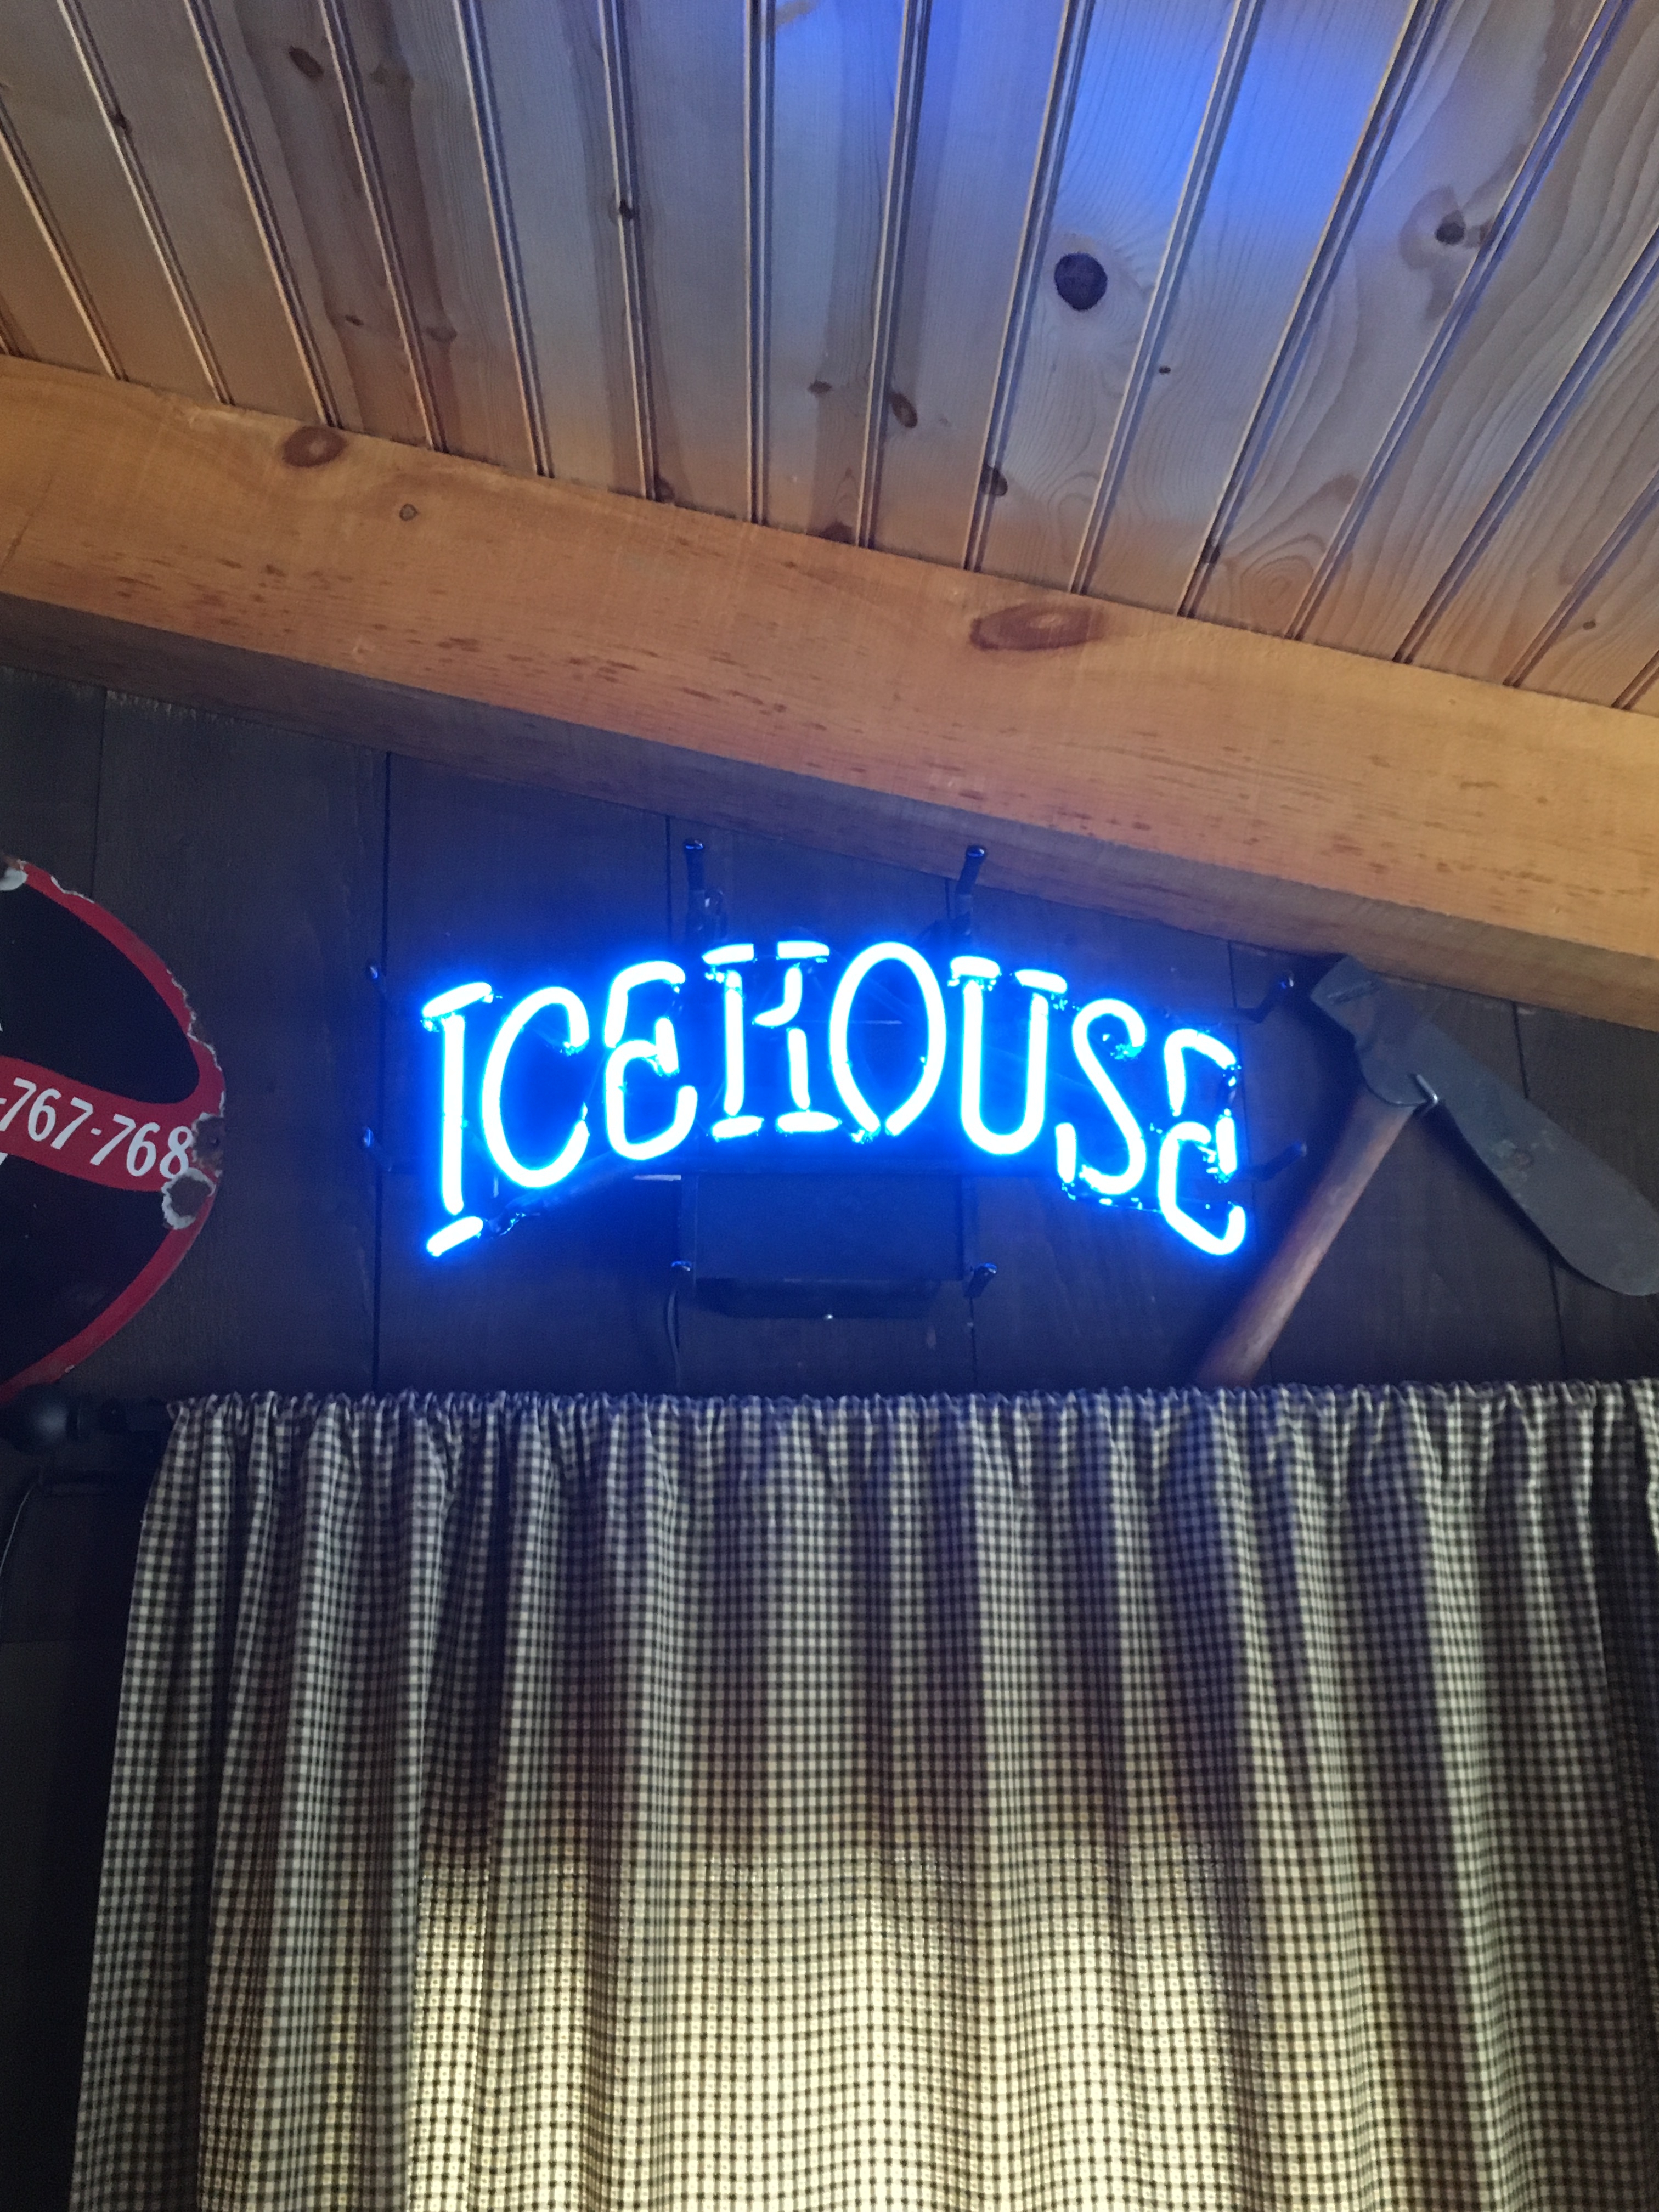 IceHouse Beer neon